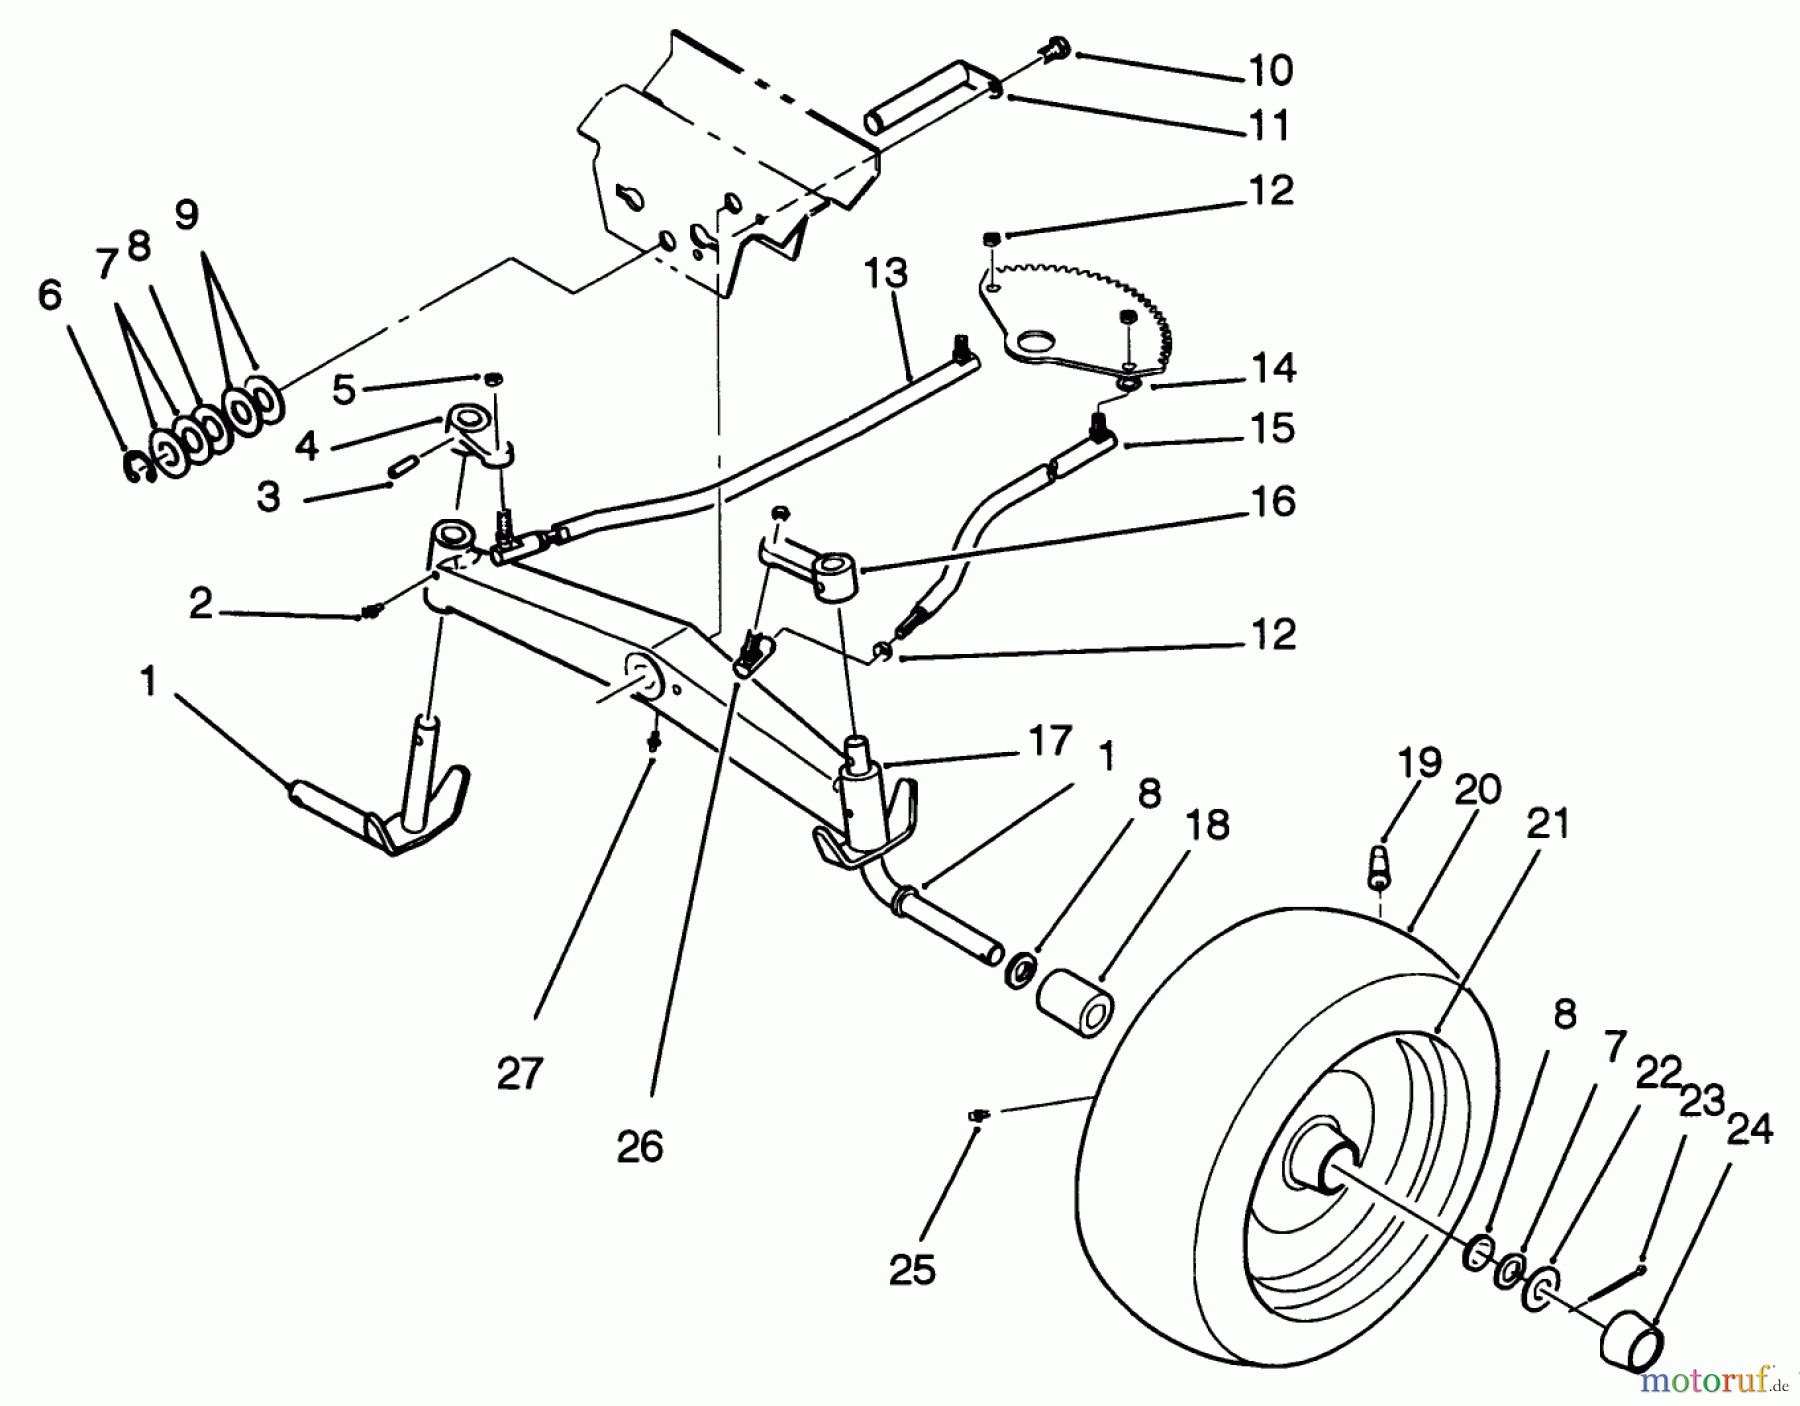  Toro Neu Mowers, Lawn & Garden Tractor Seite 1 22-14OE02 (244-H) - Toro 244-H Yard Tractor, 1992 (2000001-2999999) FRONT AXLE ASSEMBLY